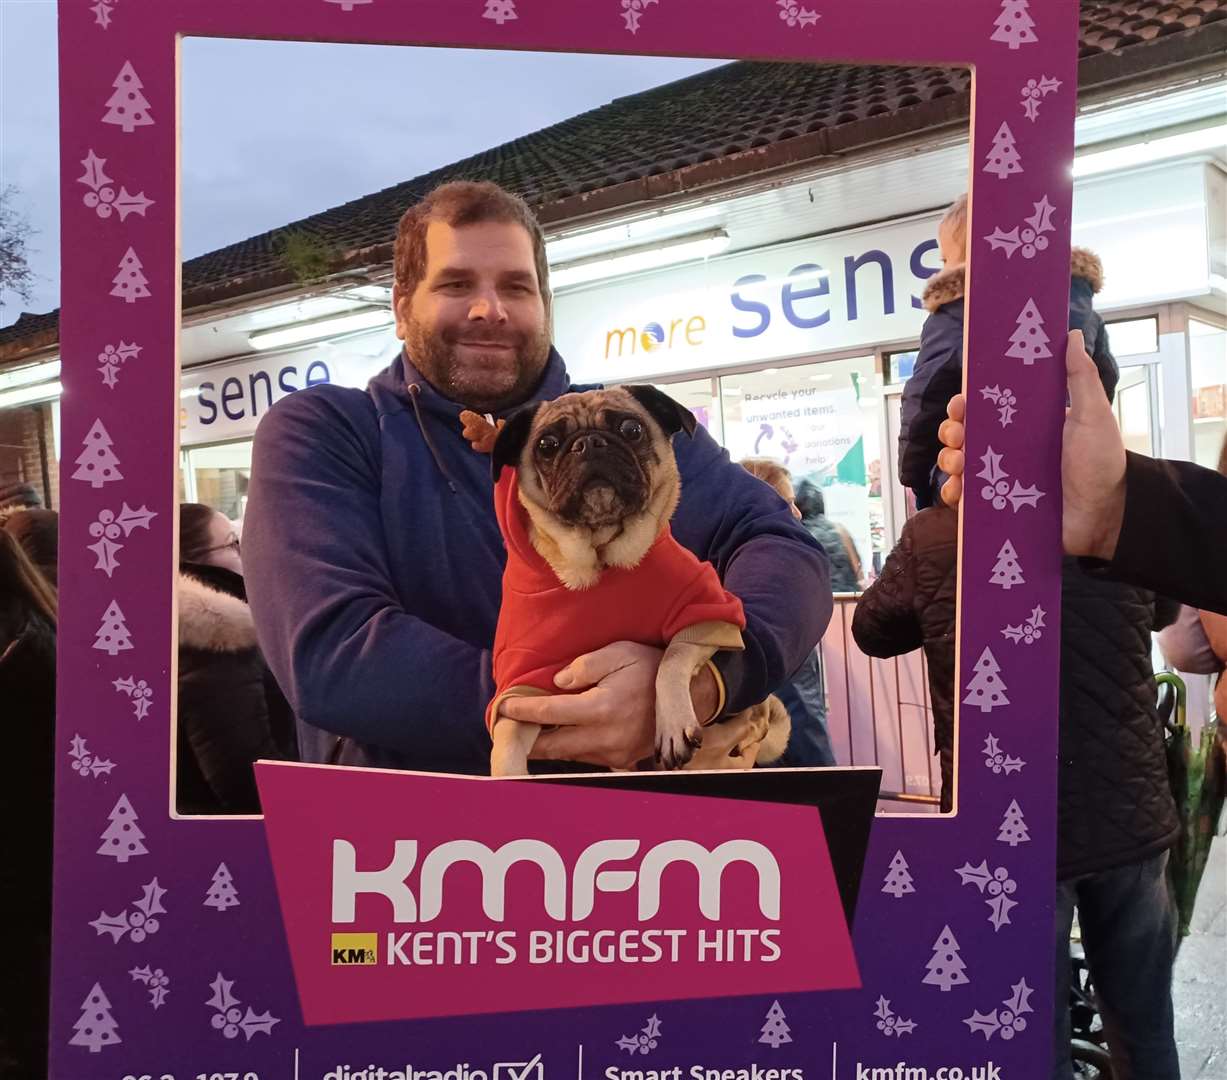 Even dogs were getting in on the act at the 2022 Rainham Christmas lights switch-on